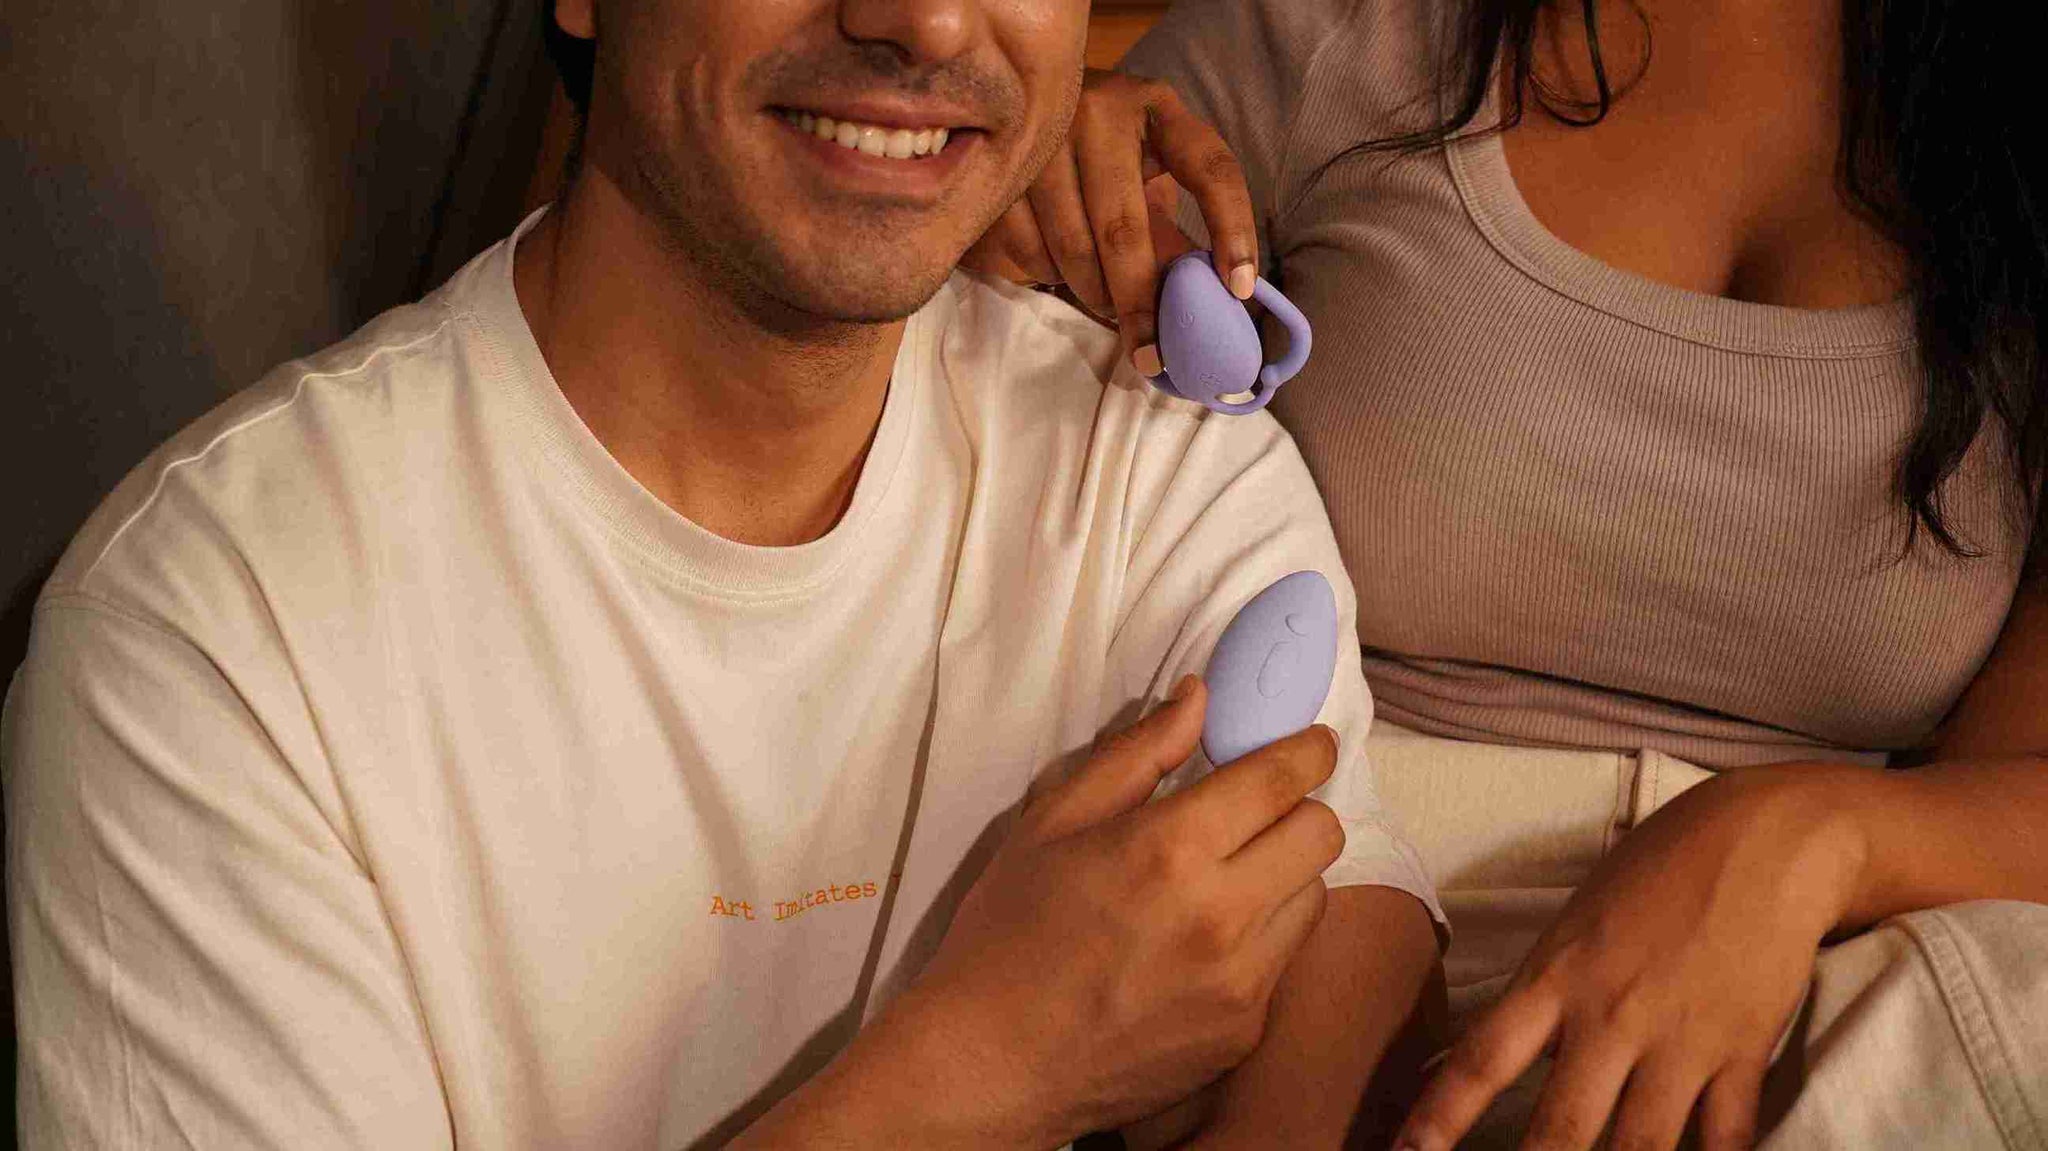 A couple playing with MyMuse’s Throb remote-controlled wearable massager